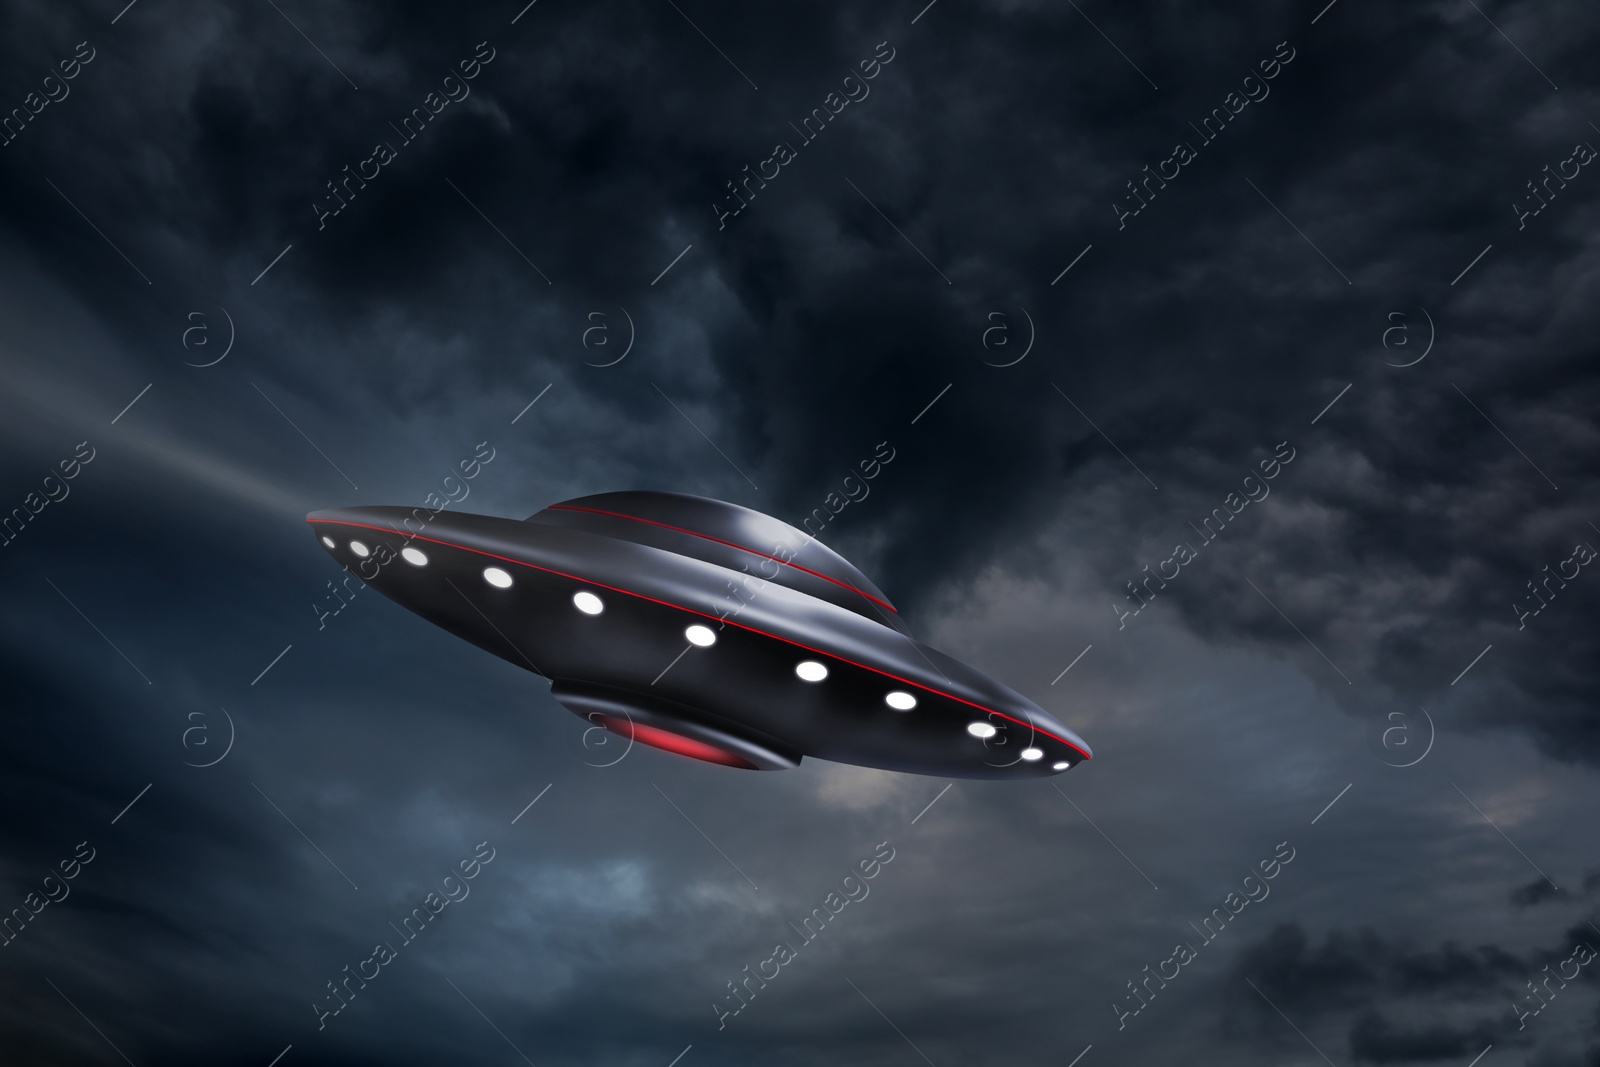 Image of UFO. Alien spaceship among clouds in sky. Extraterrestrial visitors